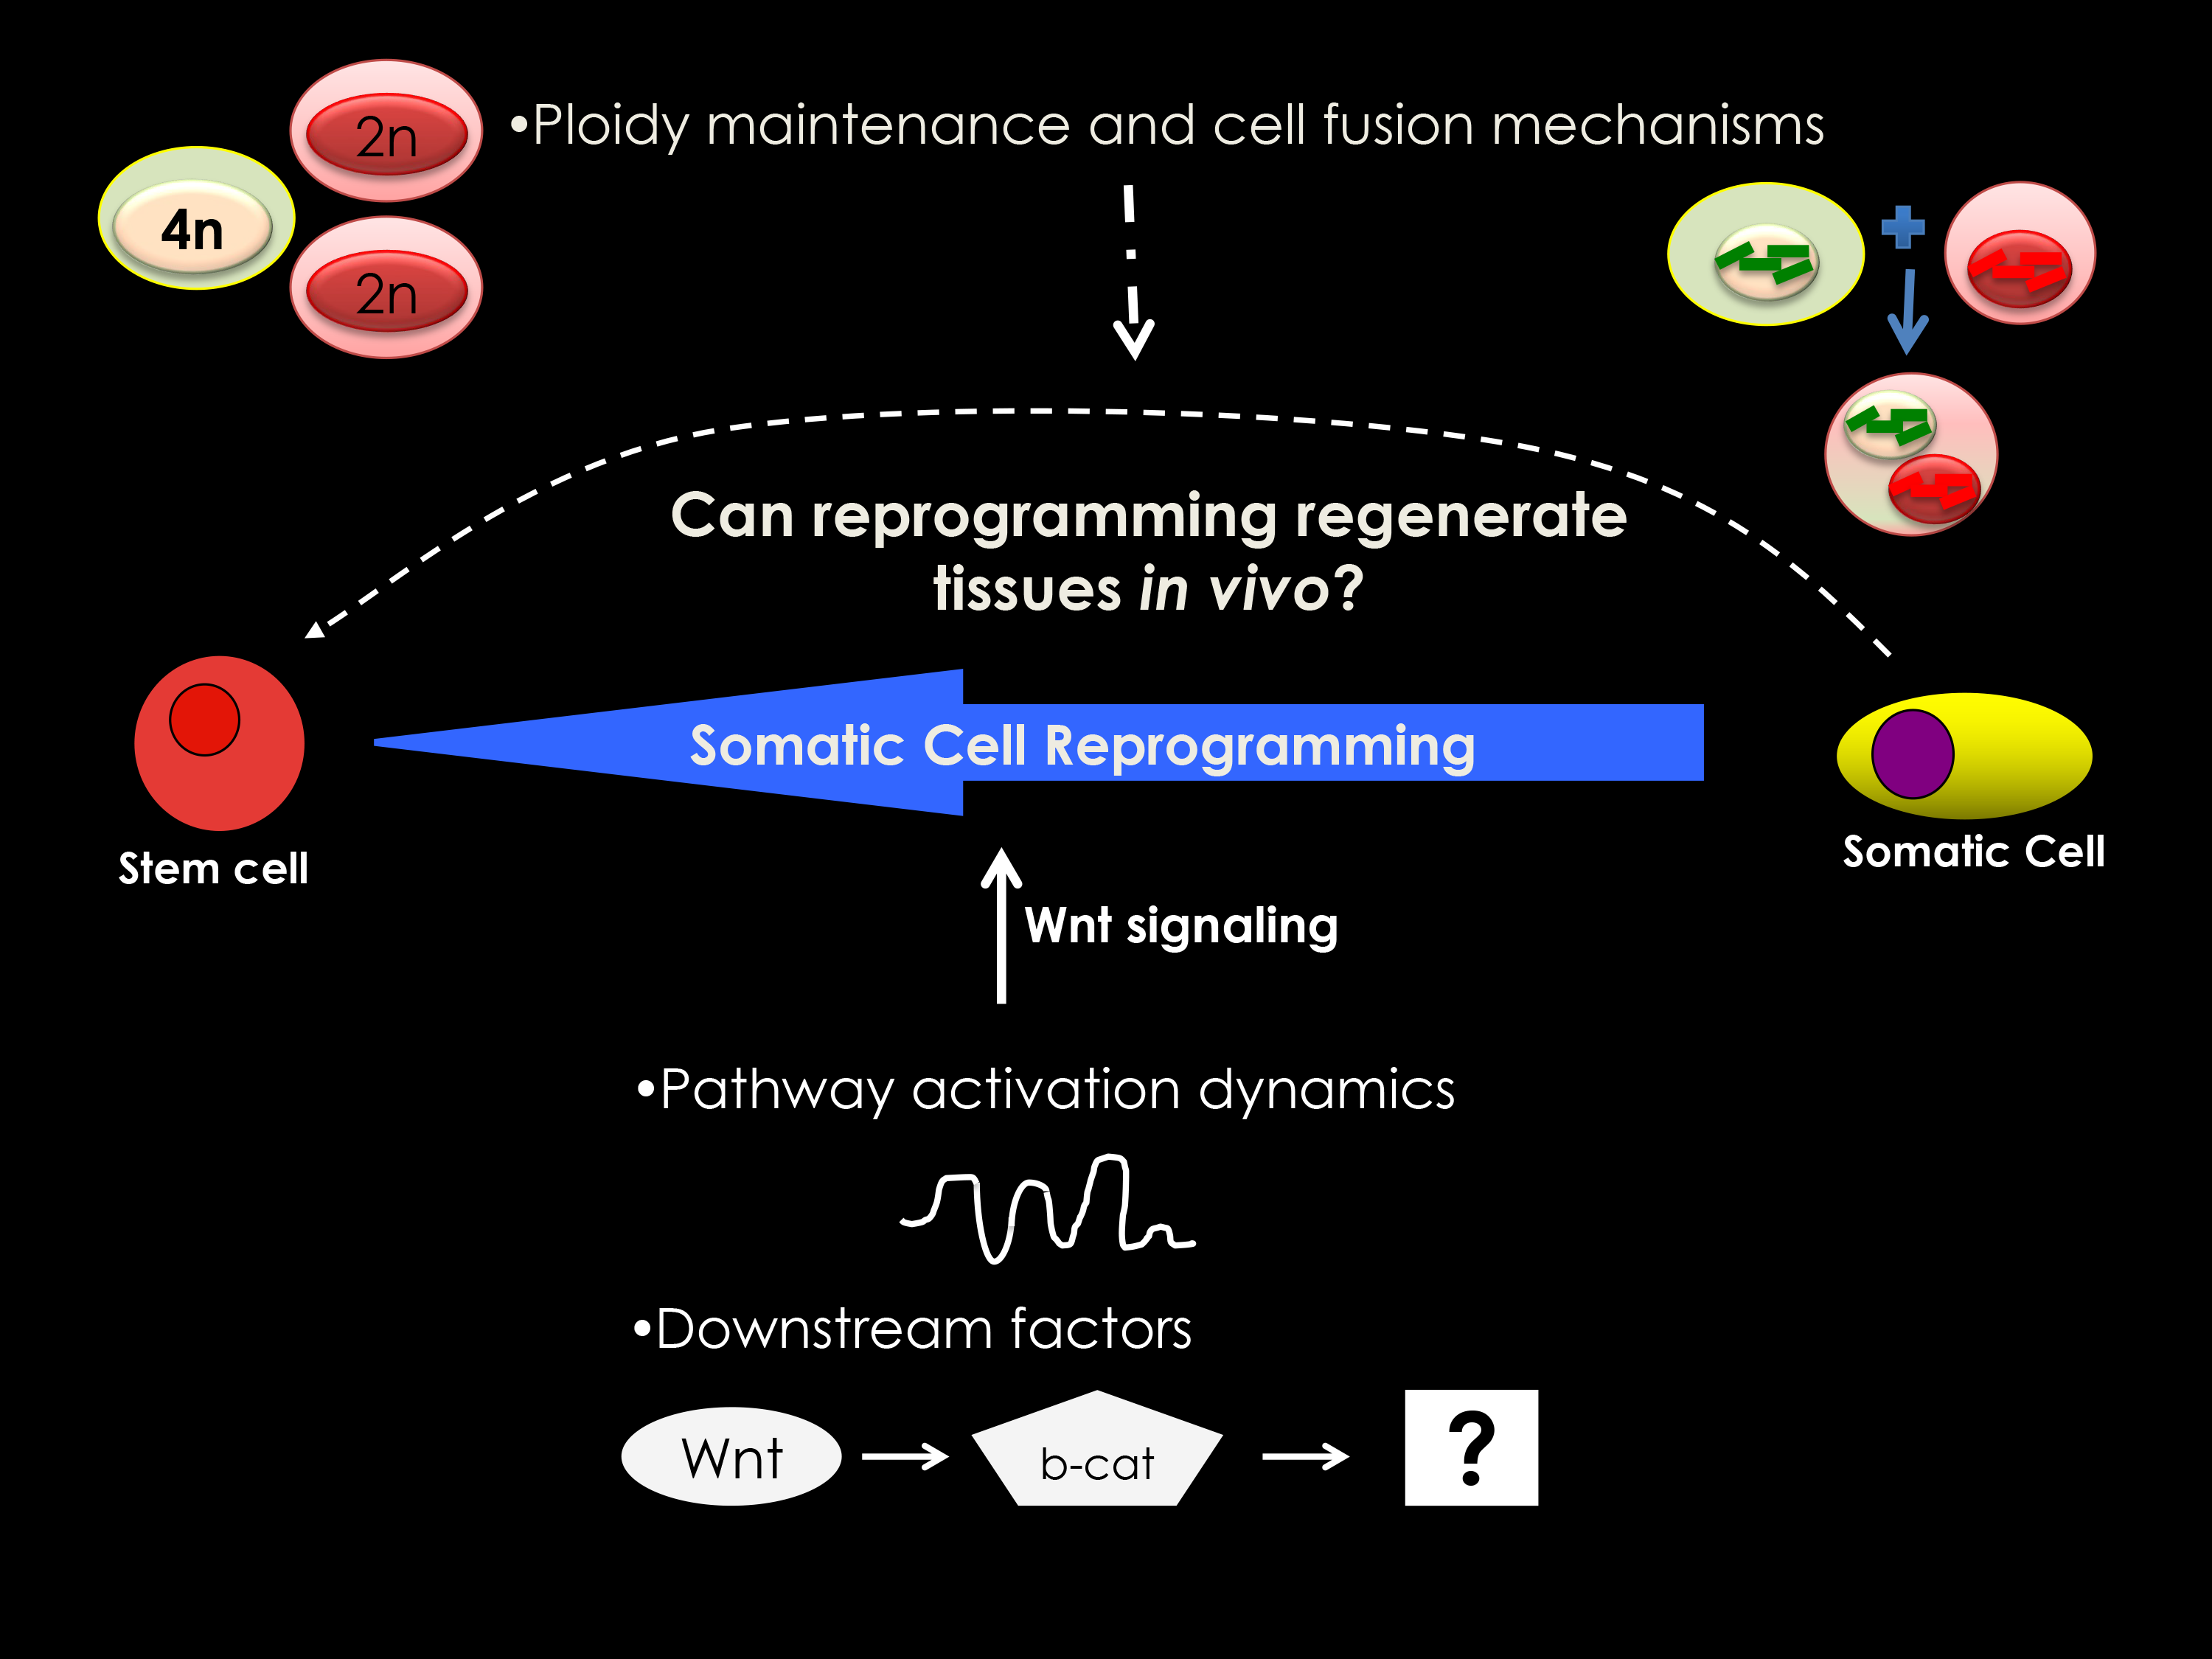 Wnt-mediated mechanisms that regulate somatic cell reprogramming and pluripotency.